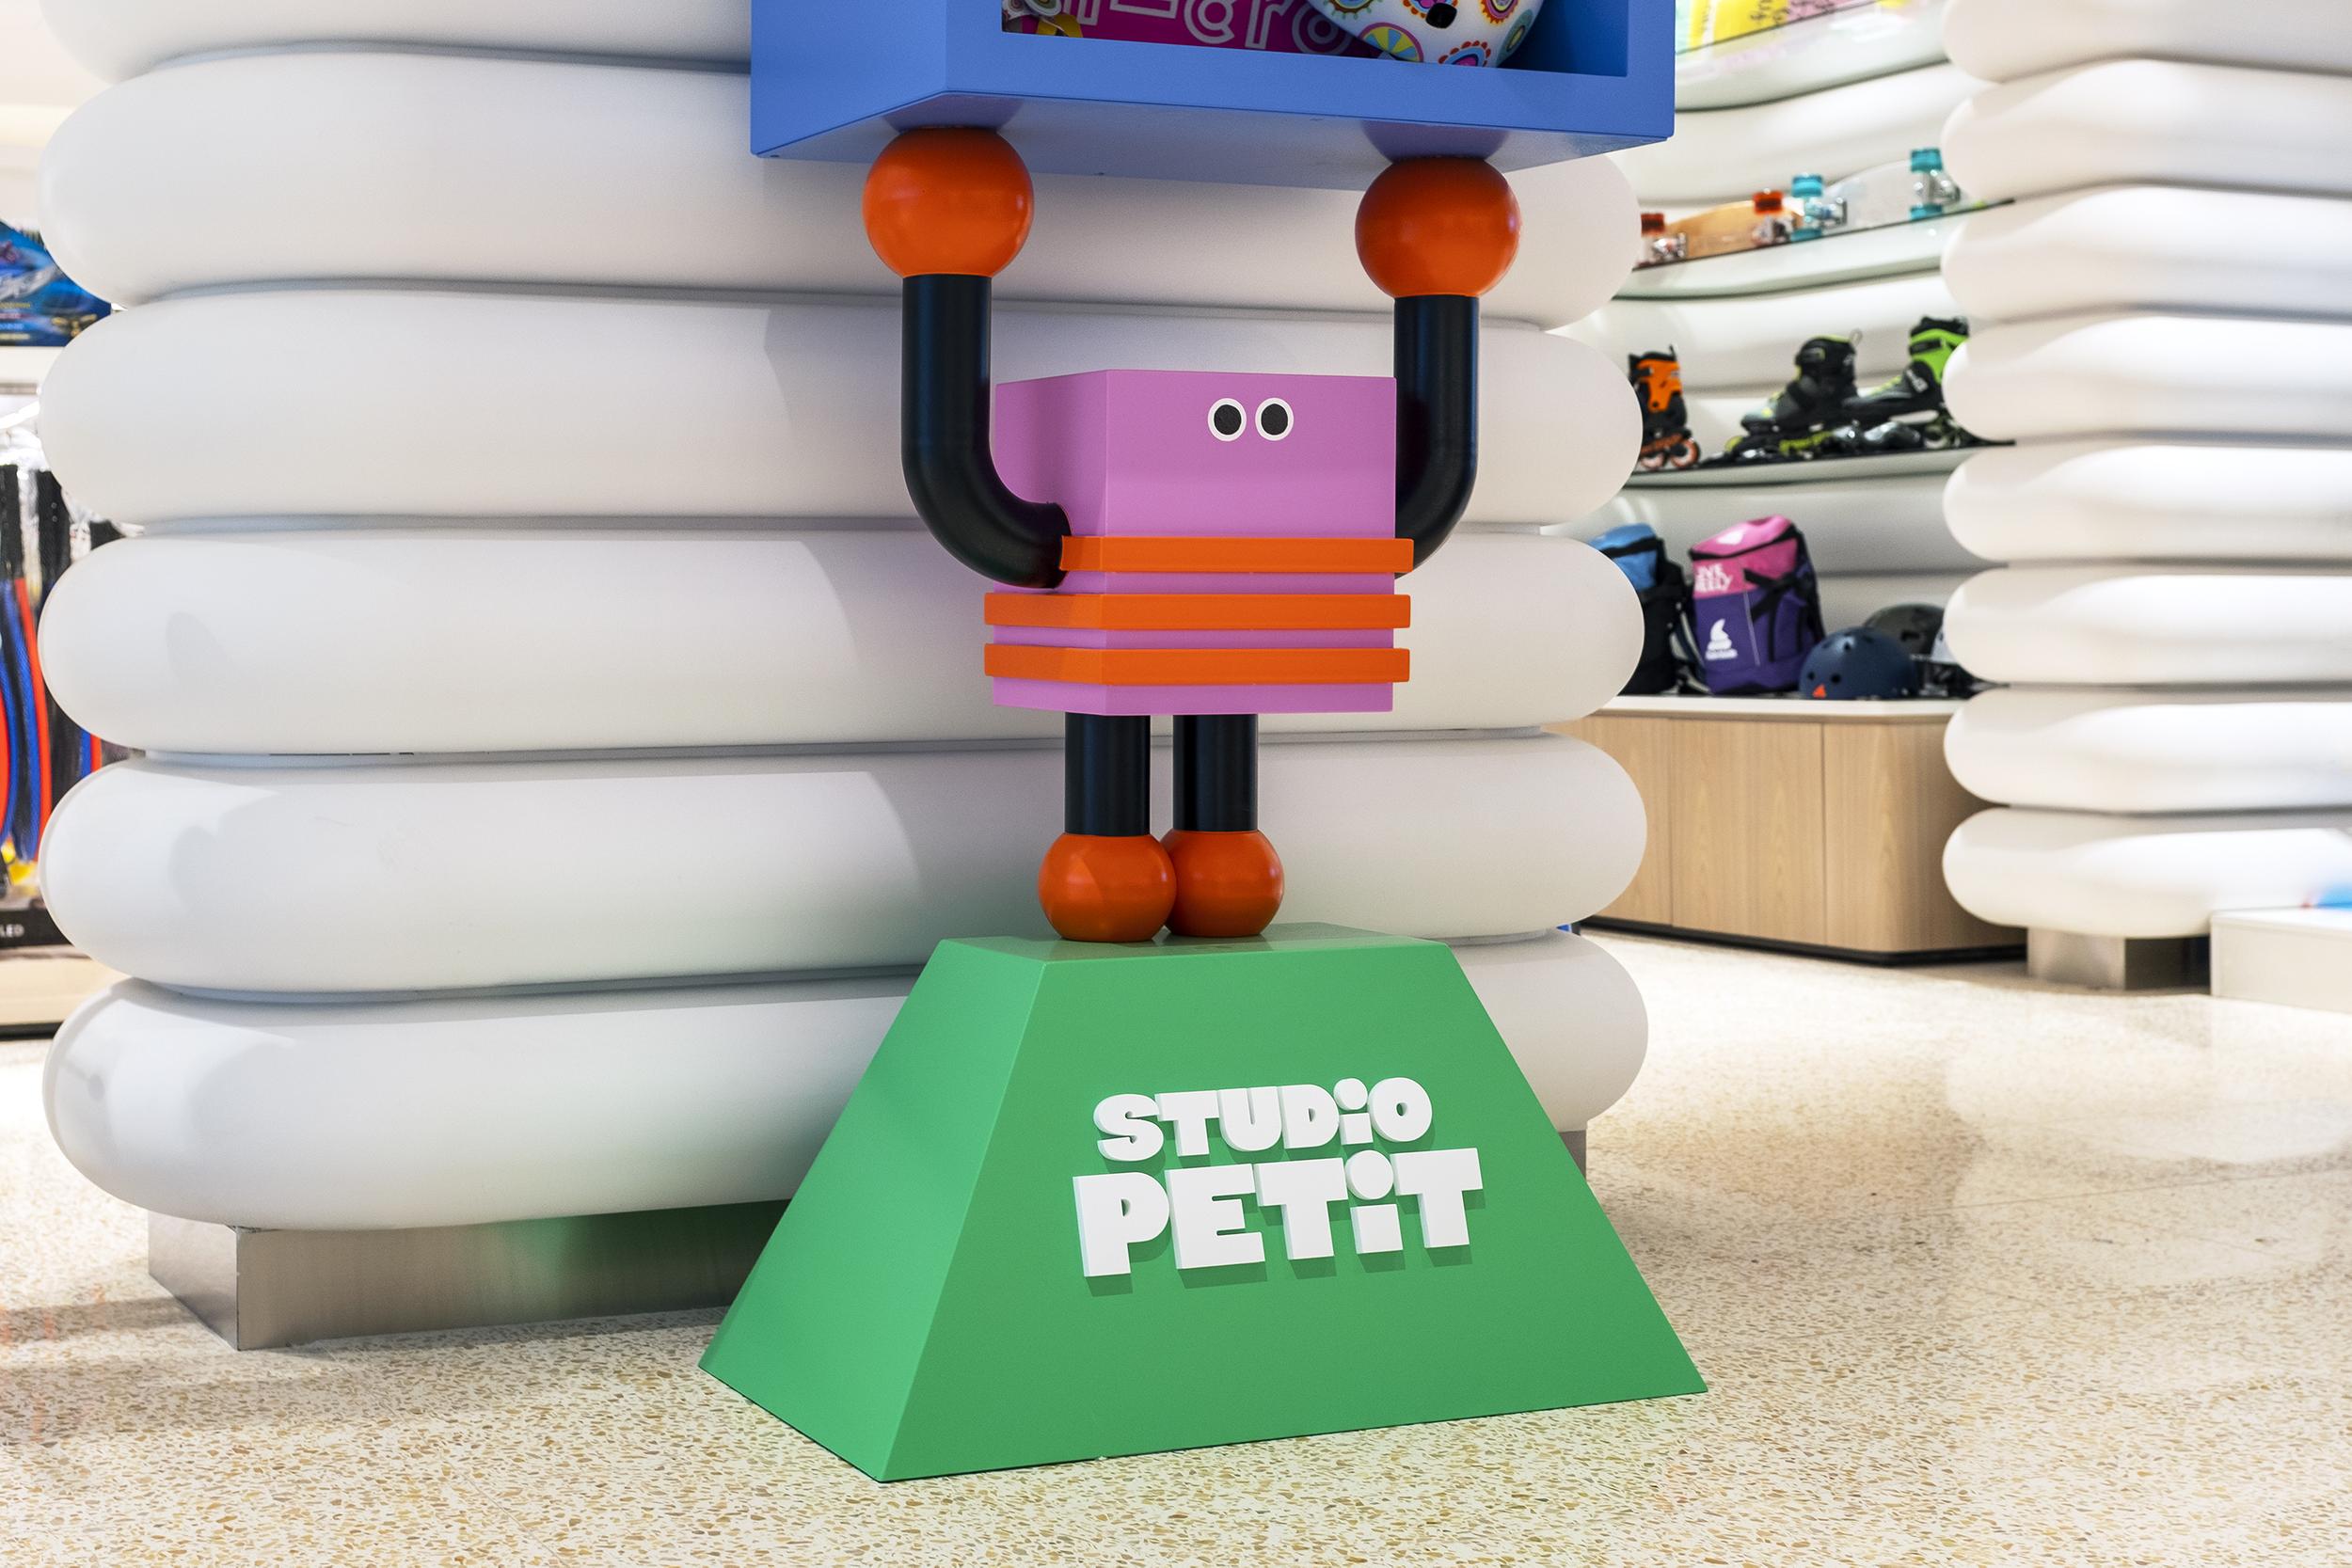 Brand identity, interior design and signage designed by Studio fnt for toy department Petit Planet at South Korean department store Hyundai